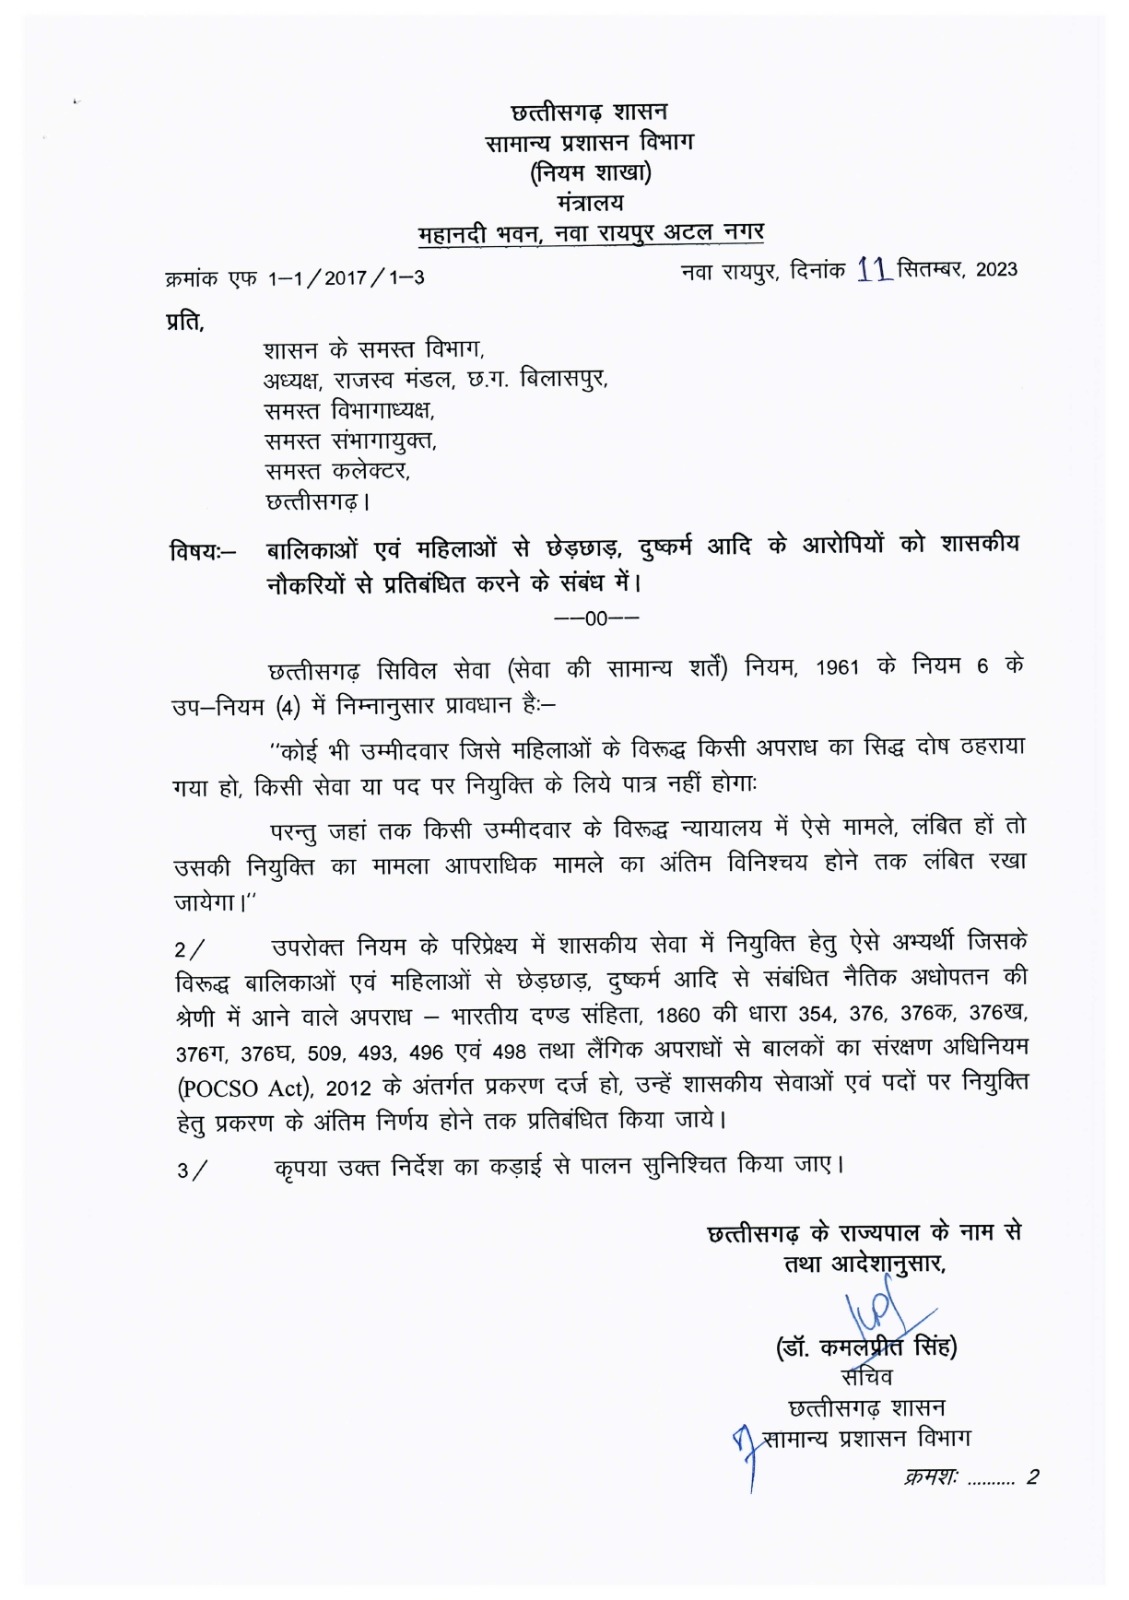 Those accused of breaking, molestation and rape of girls and women will not get government jobs, Chhattisgarh government's big decision regarding women's safety, implementation of Chief Minister Baghel's announcement, General Administration Department issued order, Khabargali